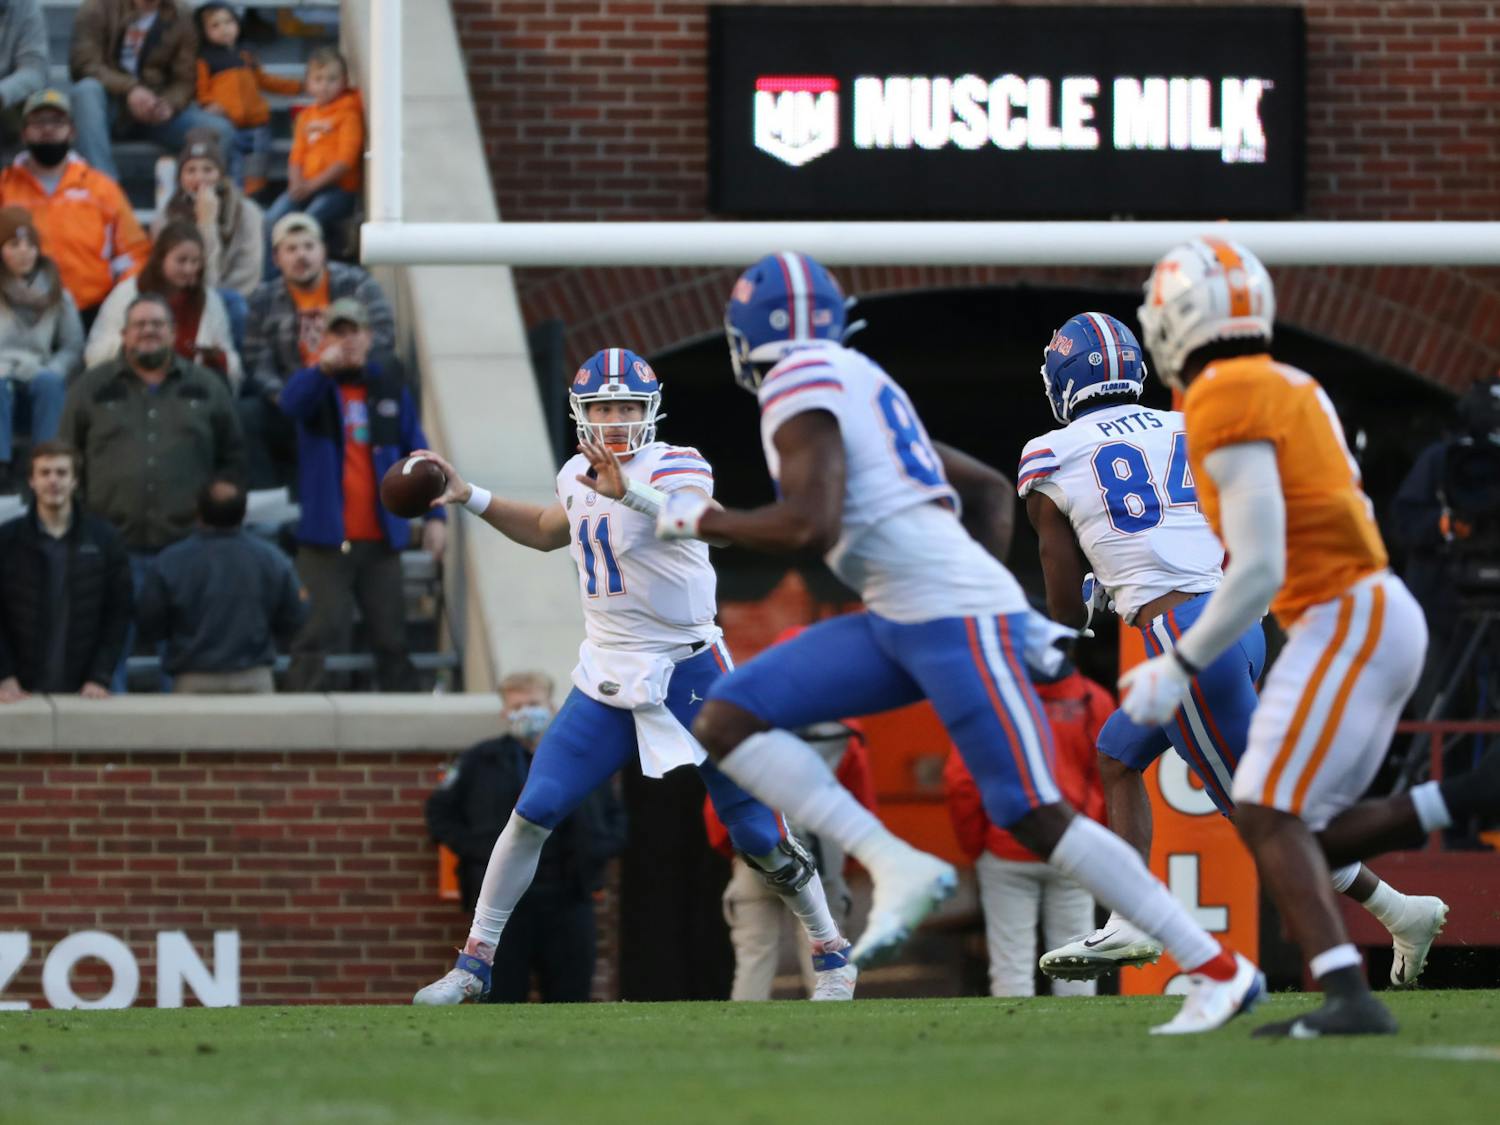 Kyle Trask (11) winds up, preparing to pass the football at the Gators' game against the Volunteers at Neyland Stadium in Knoxville, Tennessee, on Dec. 5, 2020.